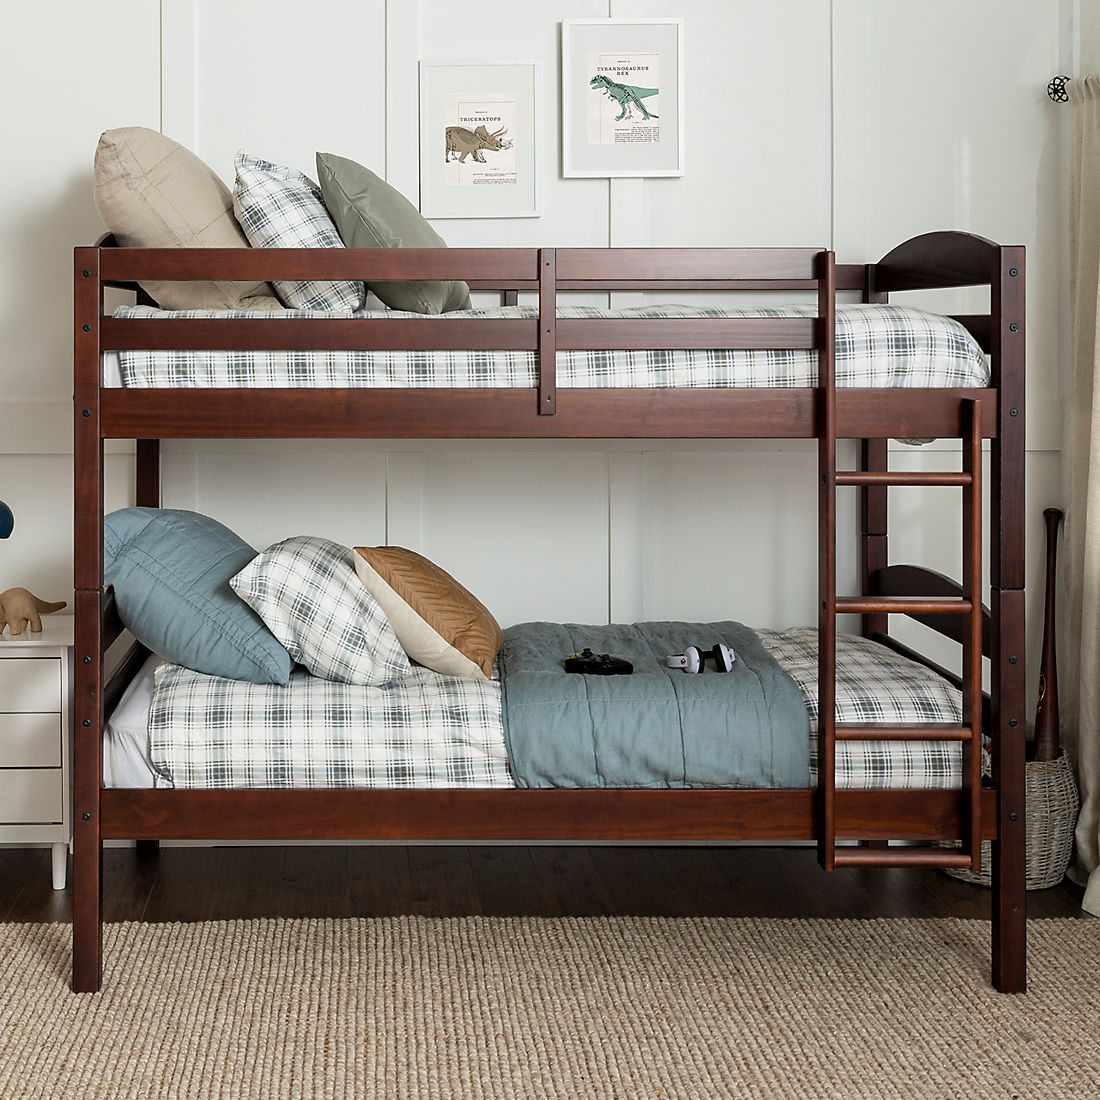 W Trends Twin Size Solid Wood Bunk Bed, Bunk Bed Or Two Twin Beds